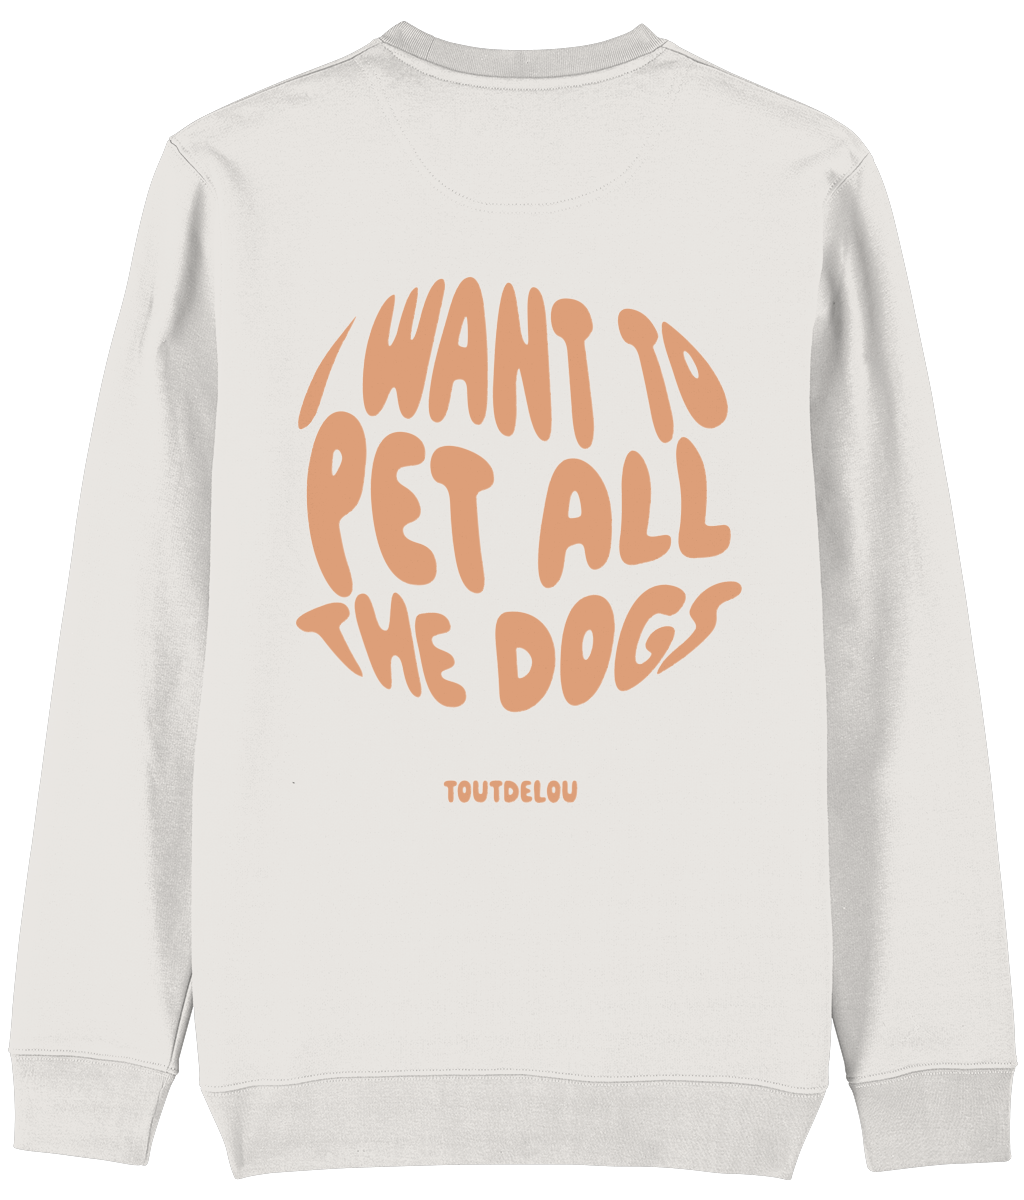 Sweater - pet all the dogs - peach - print on front and back